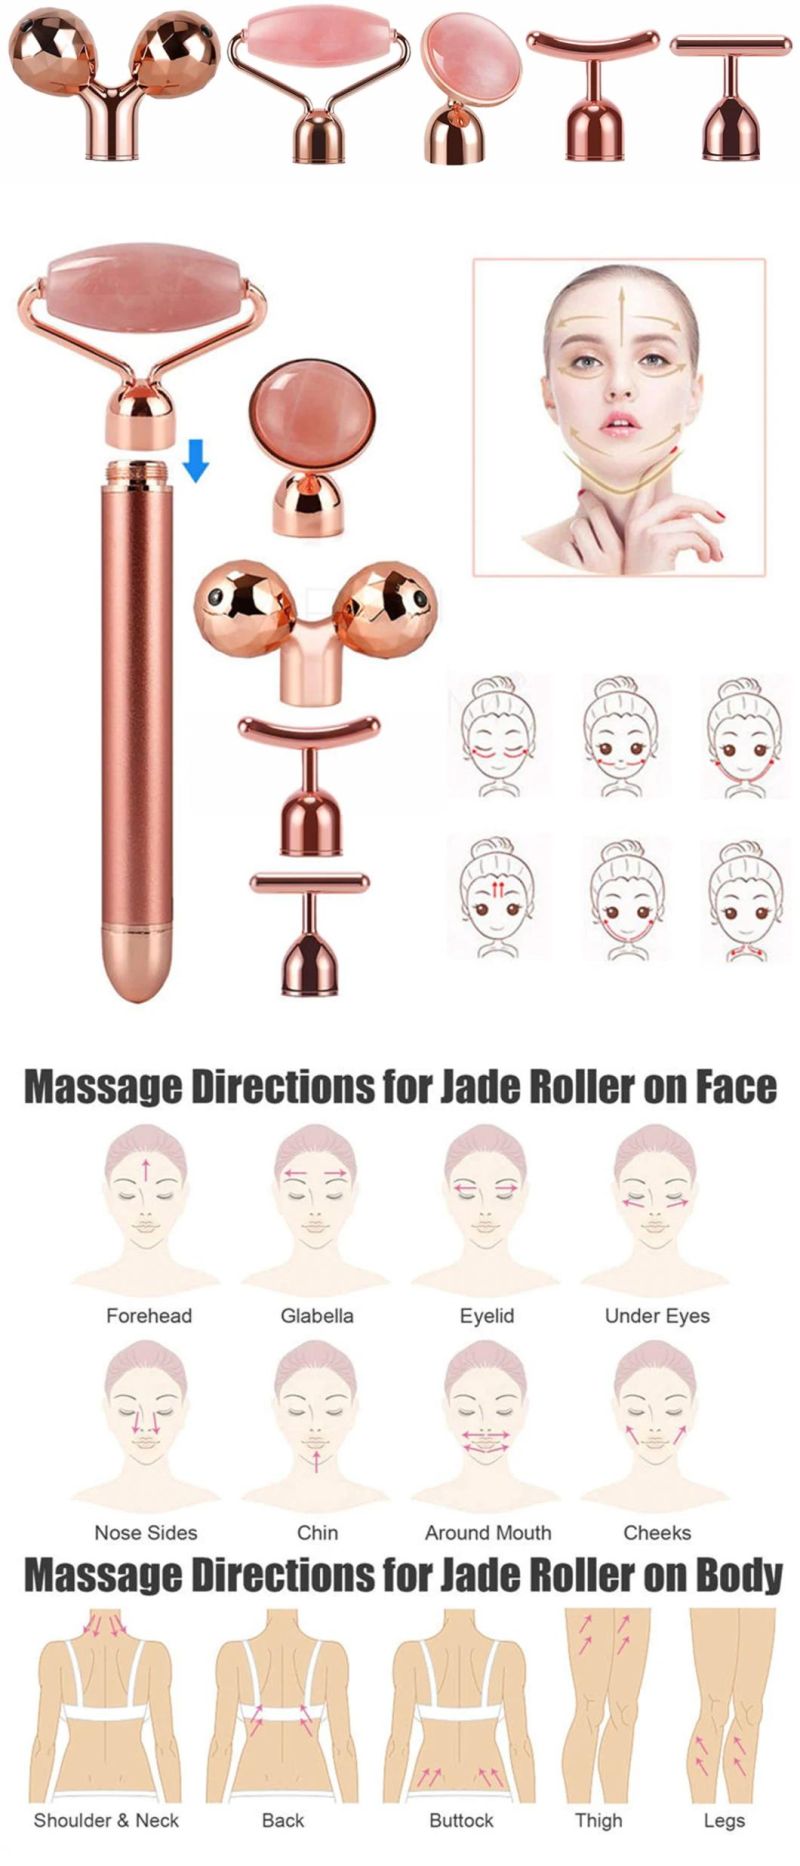 24K Gold Energy Beauty Bar LED Rose Quartz Facial Jade Roller Electric Vibrating Massager for Double Chin Reduce Face Lifting